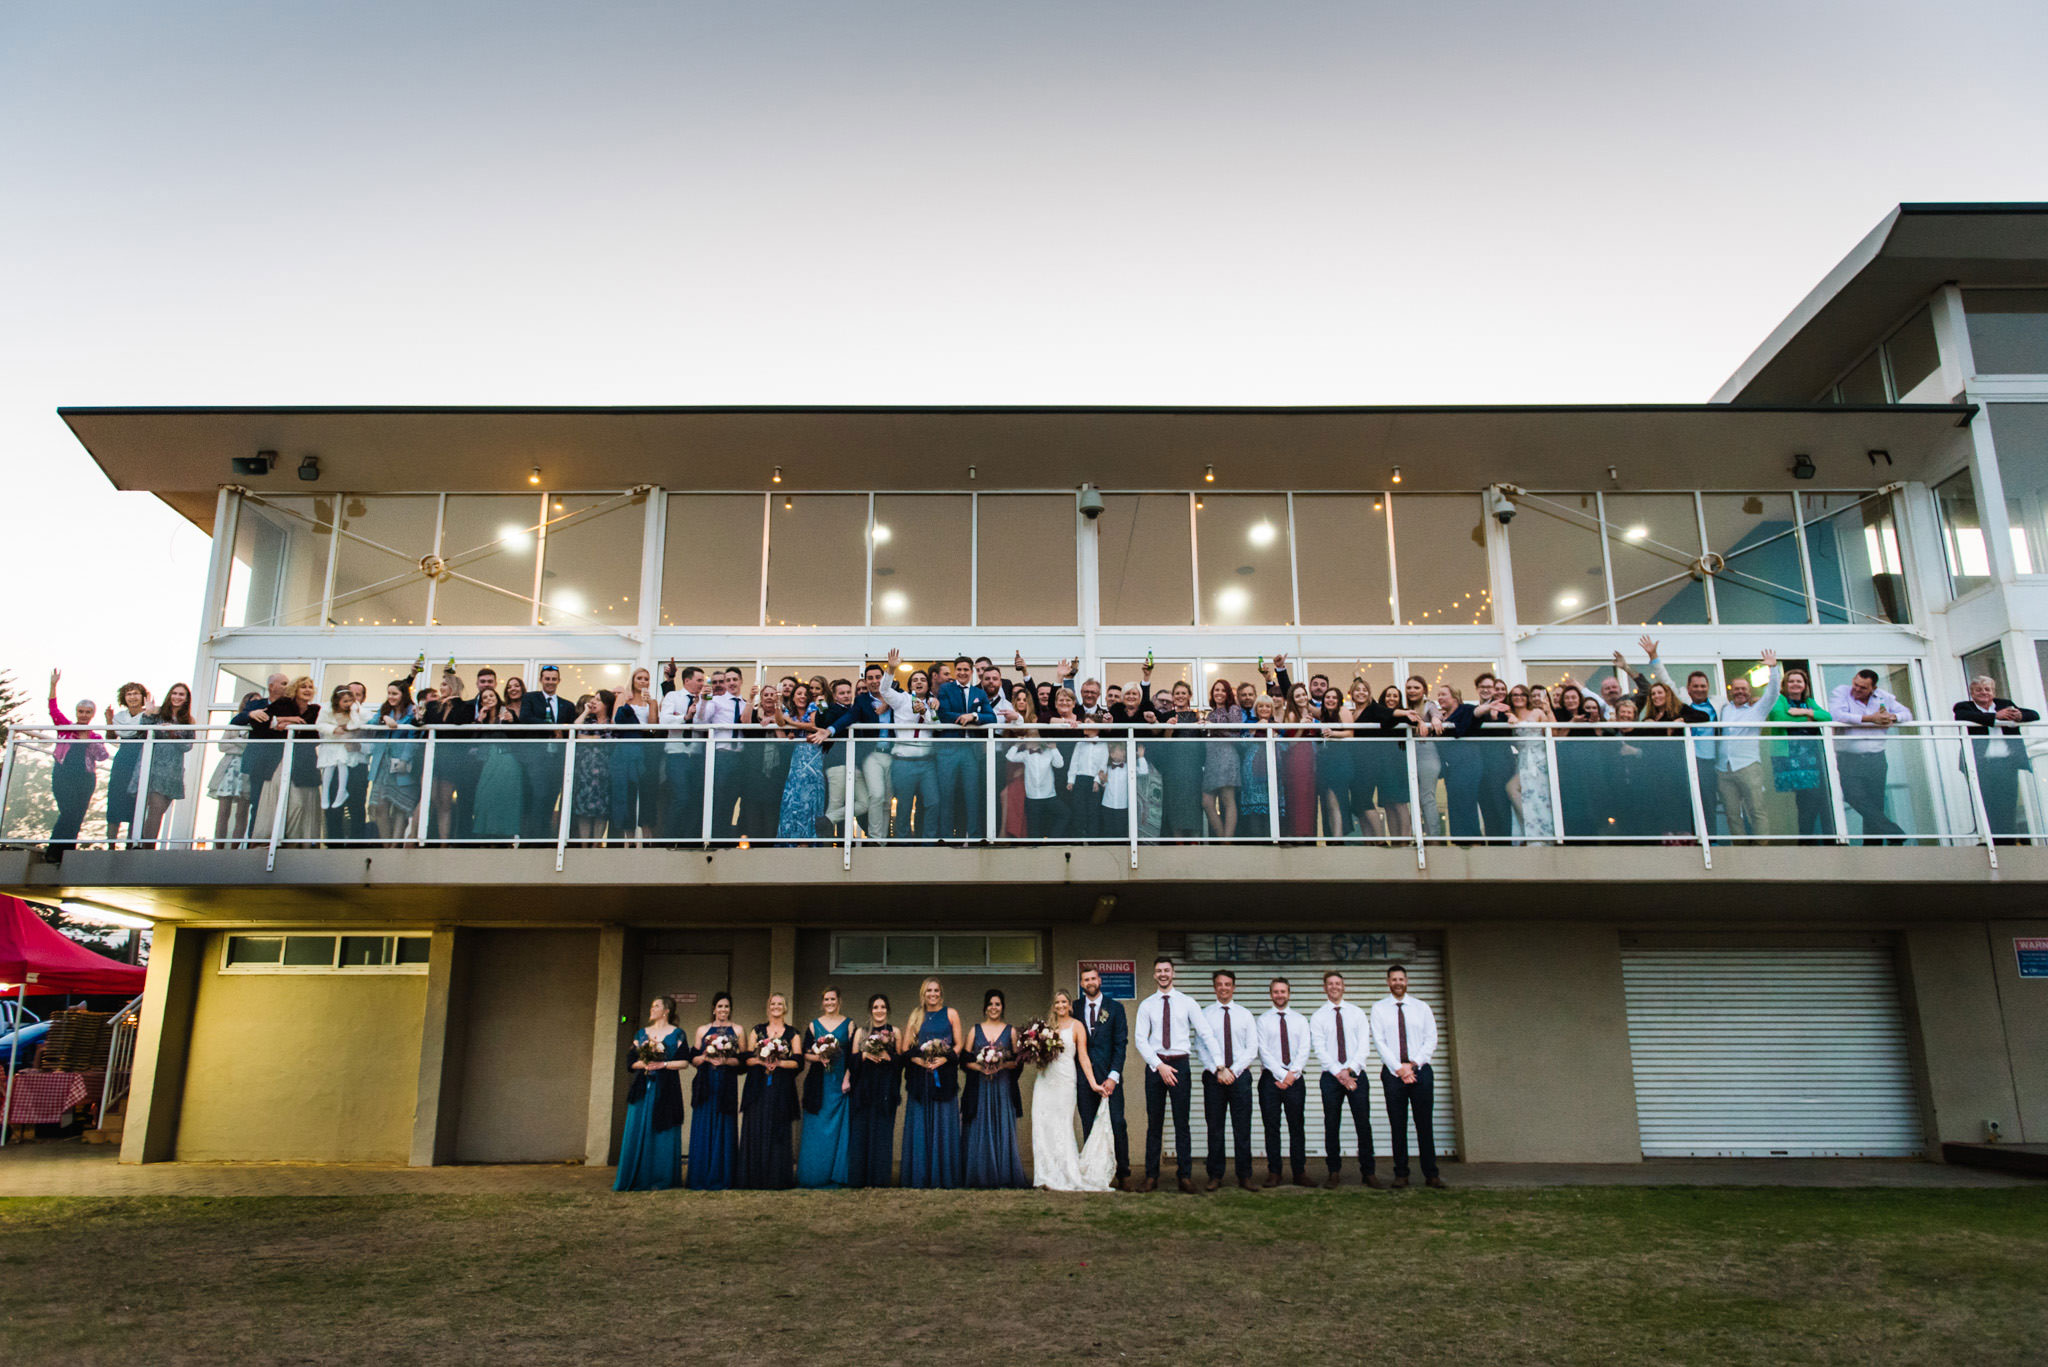 Group photo of all the guests at reception at Narrabeen Beach SLSC